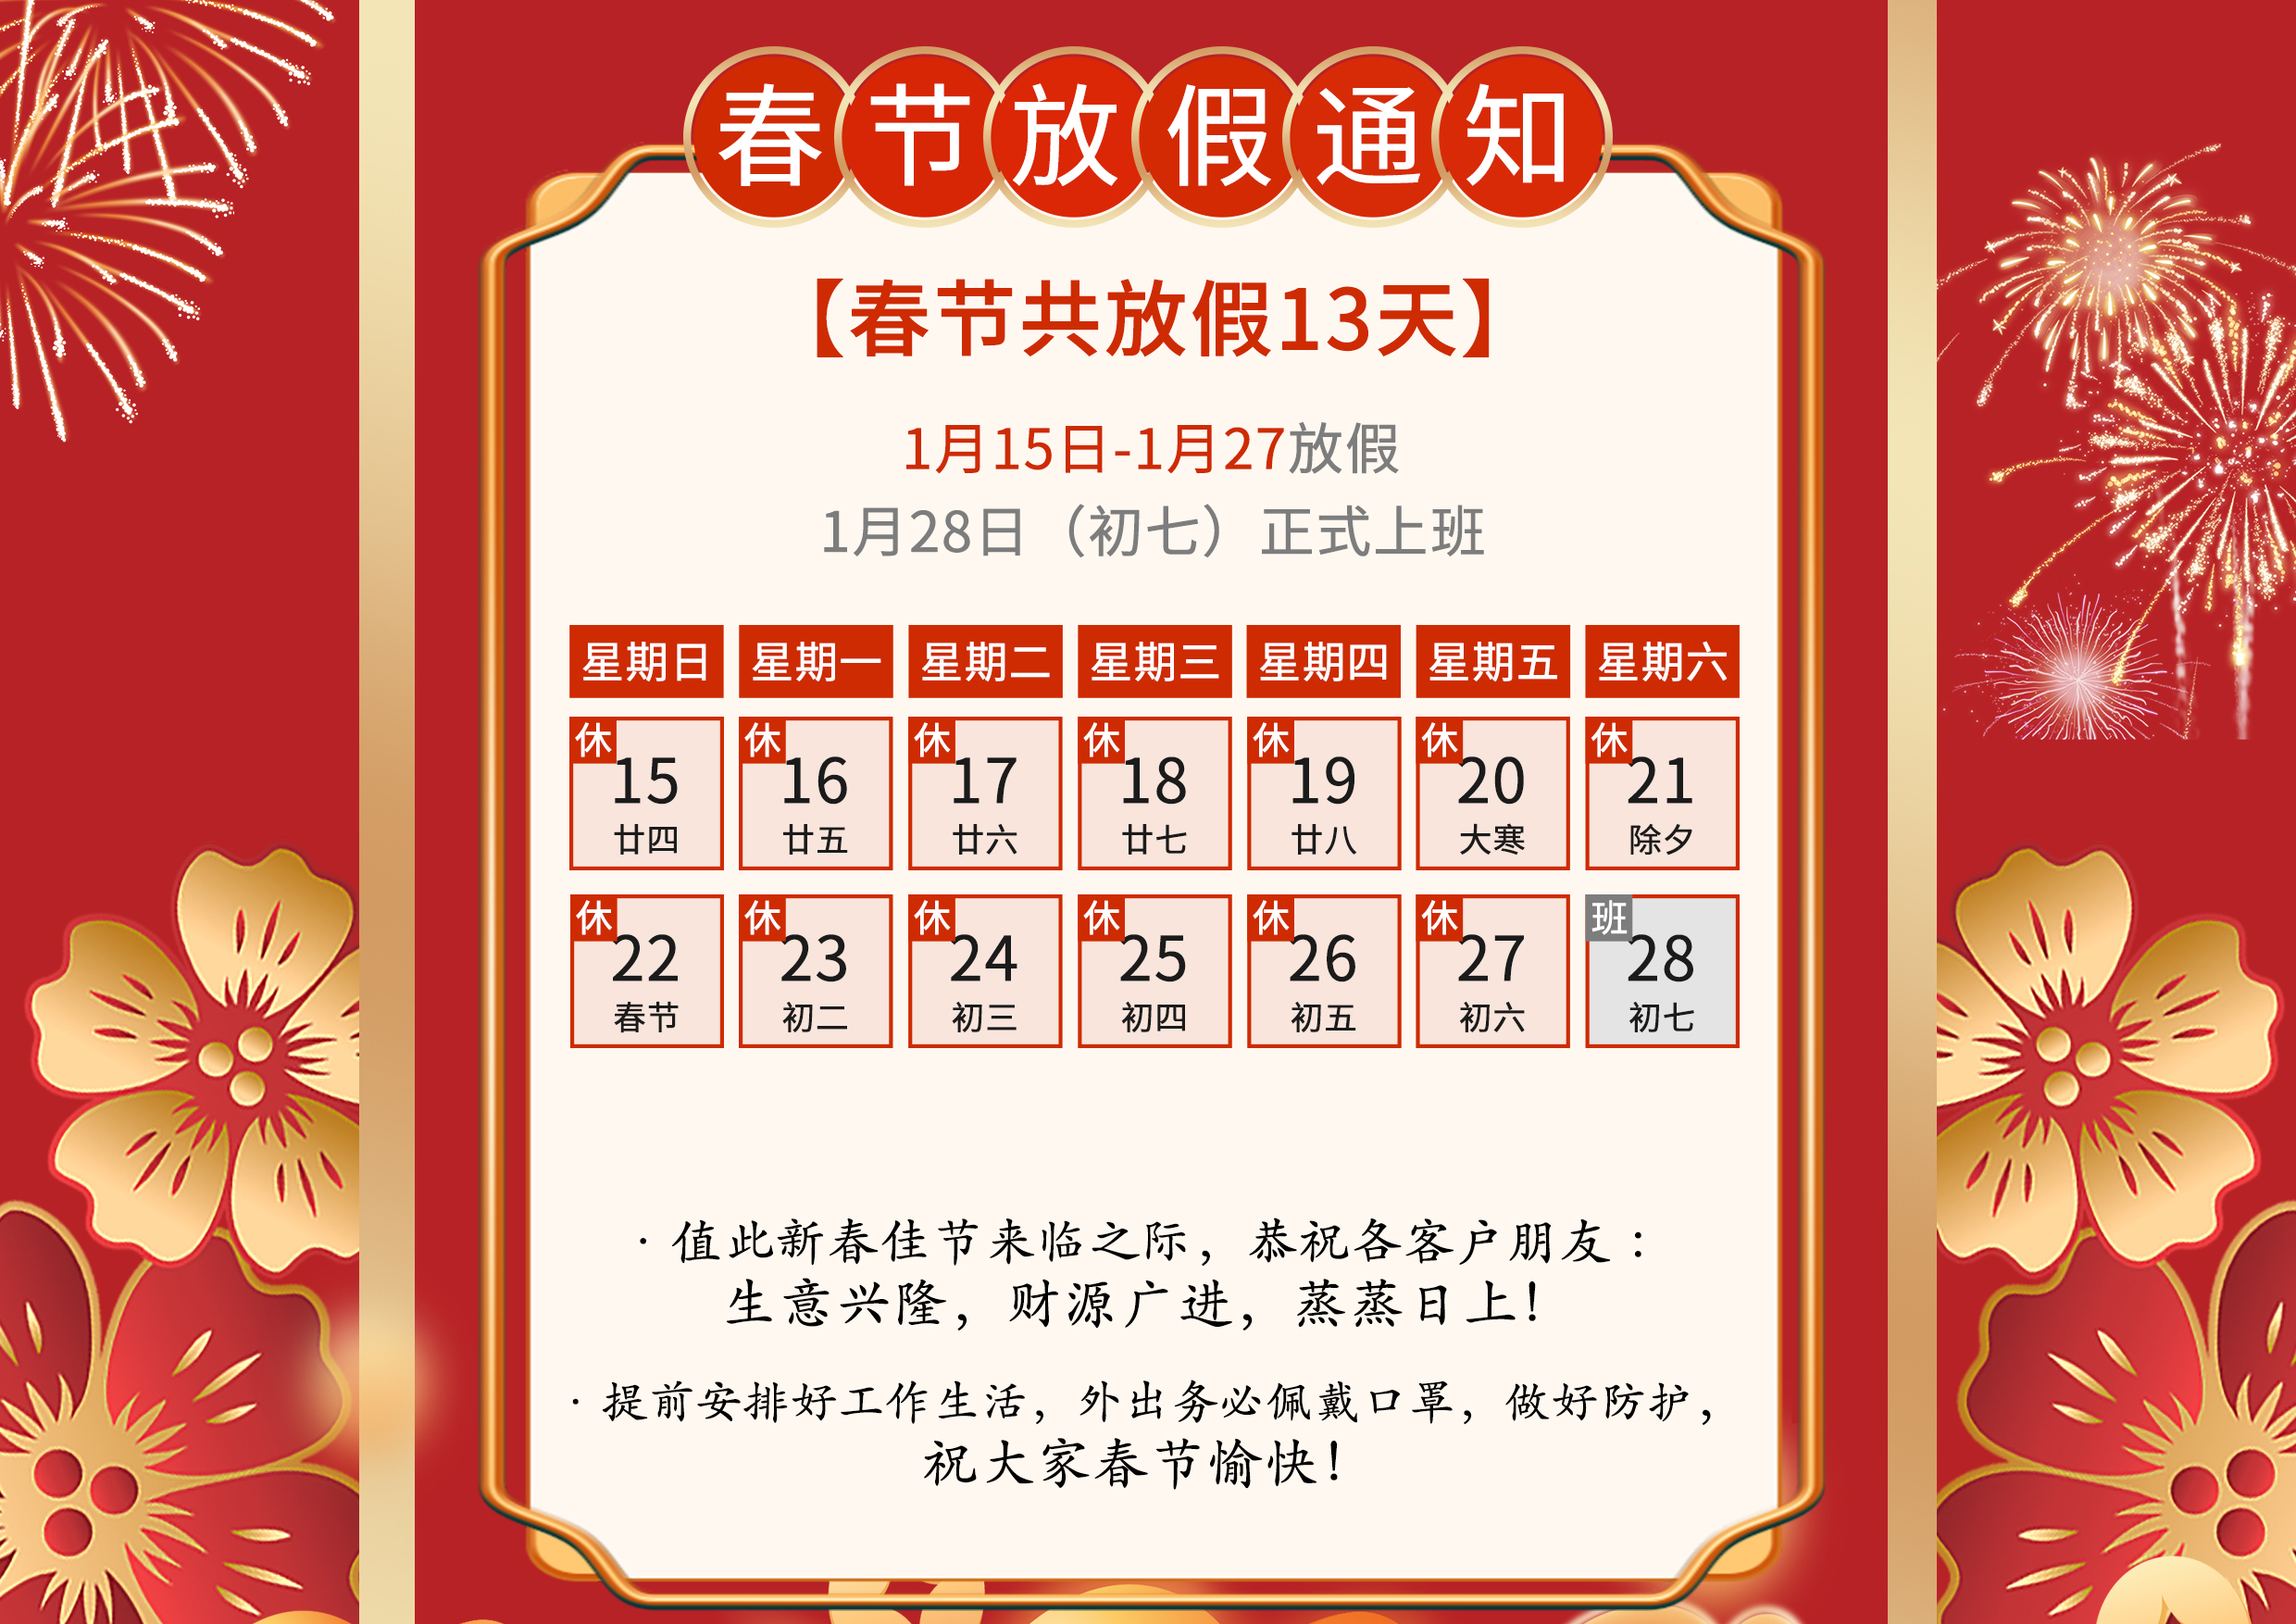 Yumeilong 2023 Spring Festival Holiday Notice